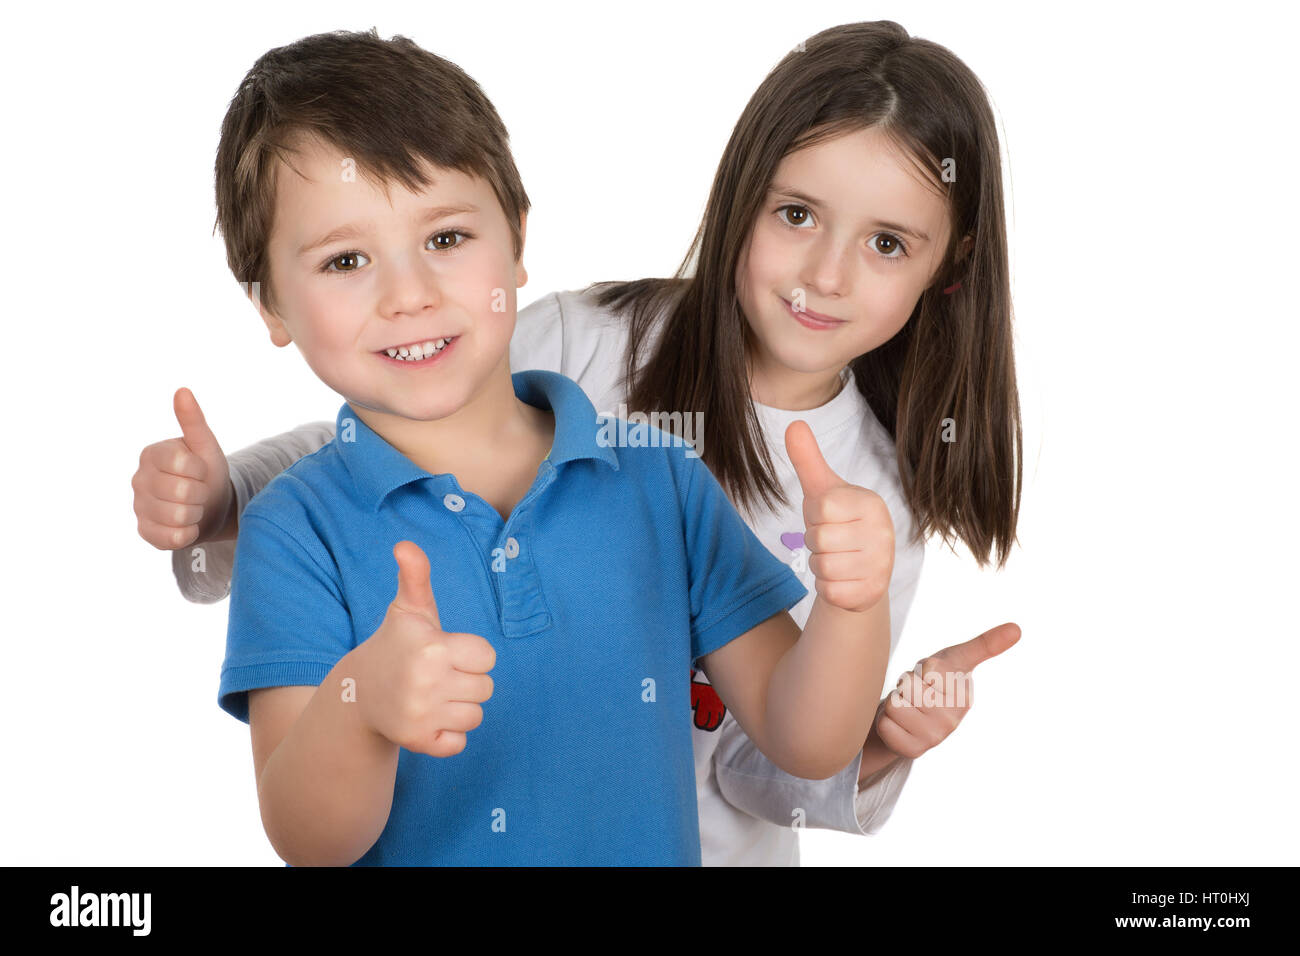 Happy boy and a girl smiling with thumbs up. Isolated on a white background. Stock Photo